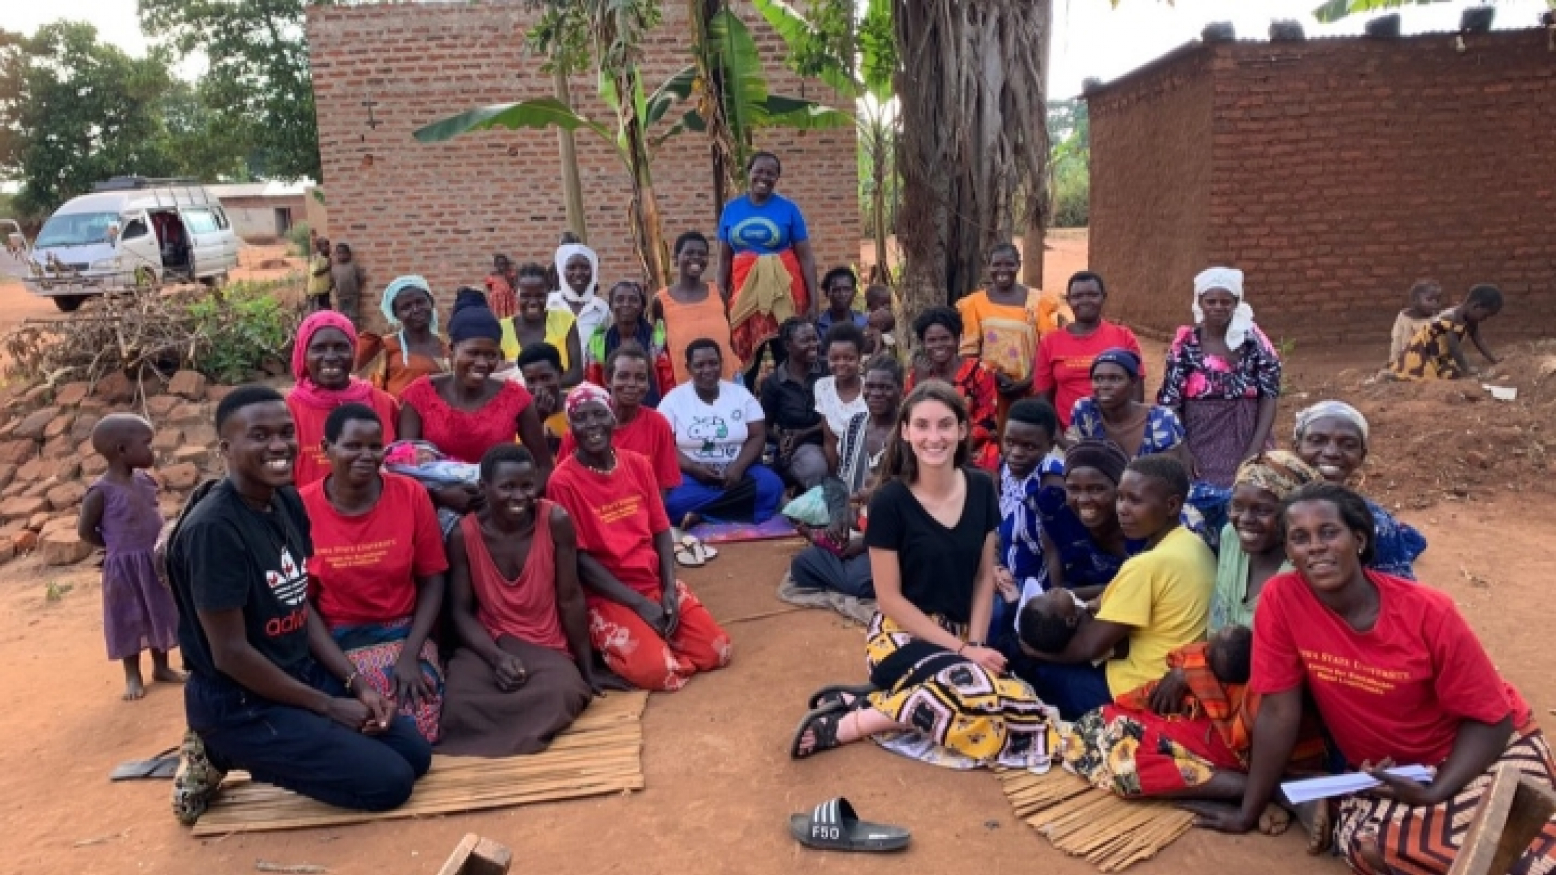 Sofia Fernandez, a young white woman with brown hair, sits on the ground surrounded by approximately 30 Ugandan people. All are smiling for a photo. 